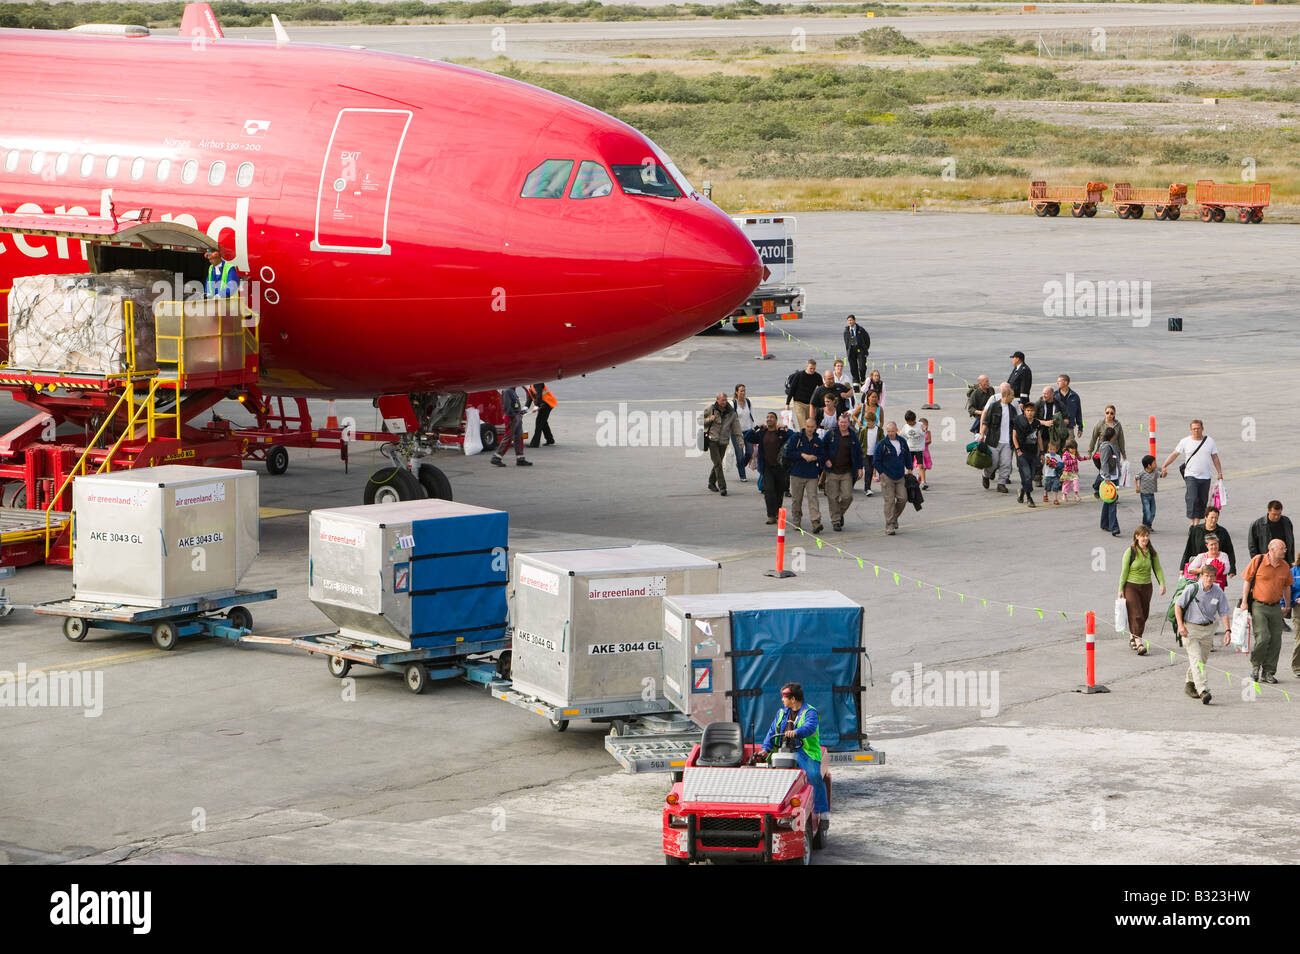 An air Greenland flight at Kangerlussuaq airport bringing freight and tourists to Greenland Stock Photo